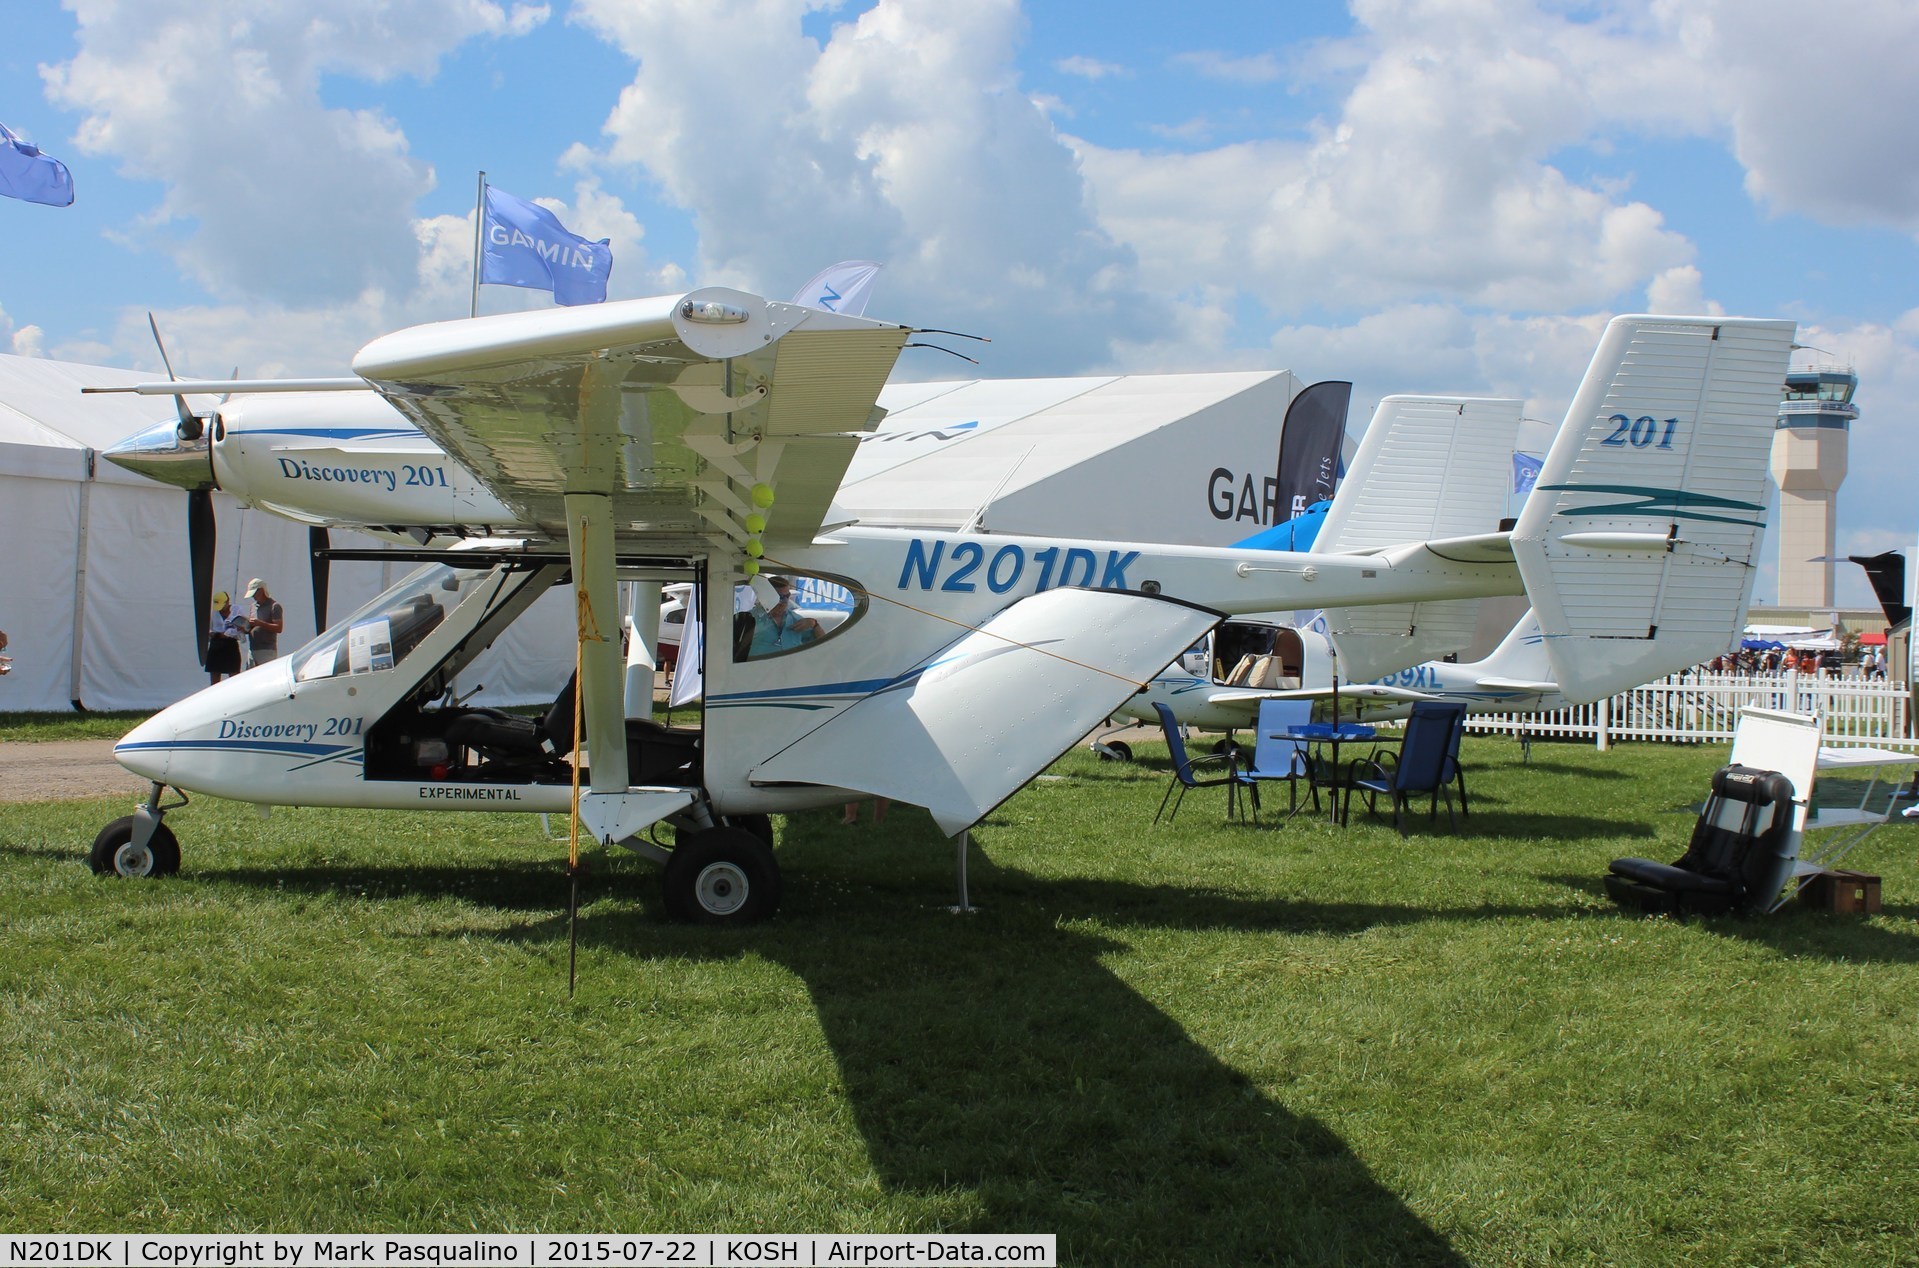 N201DK, 2012 Discovery Aviation 201 C/N A-33-00-005, Discovery Aviation 201